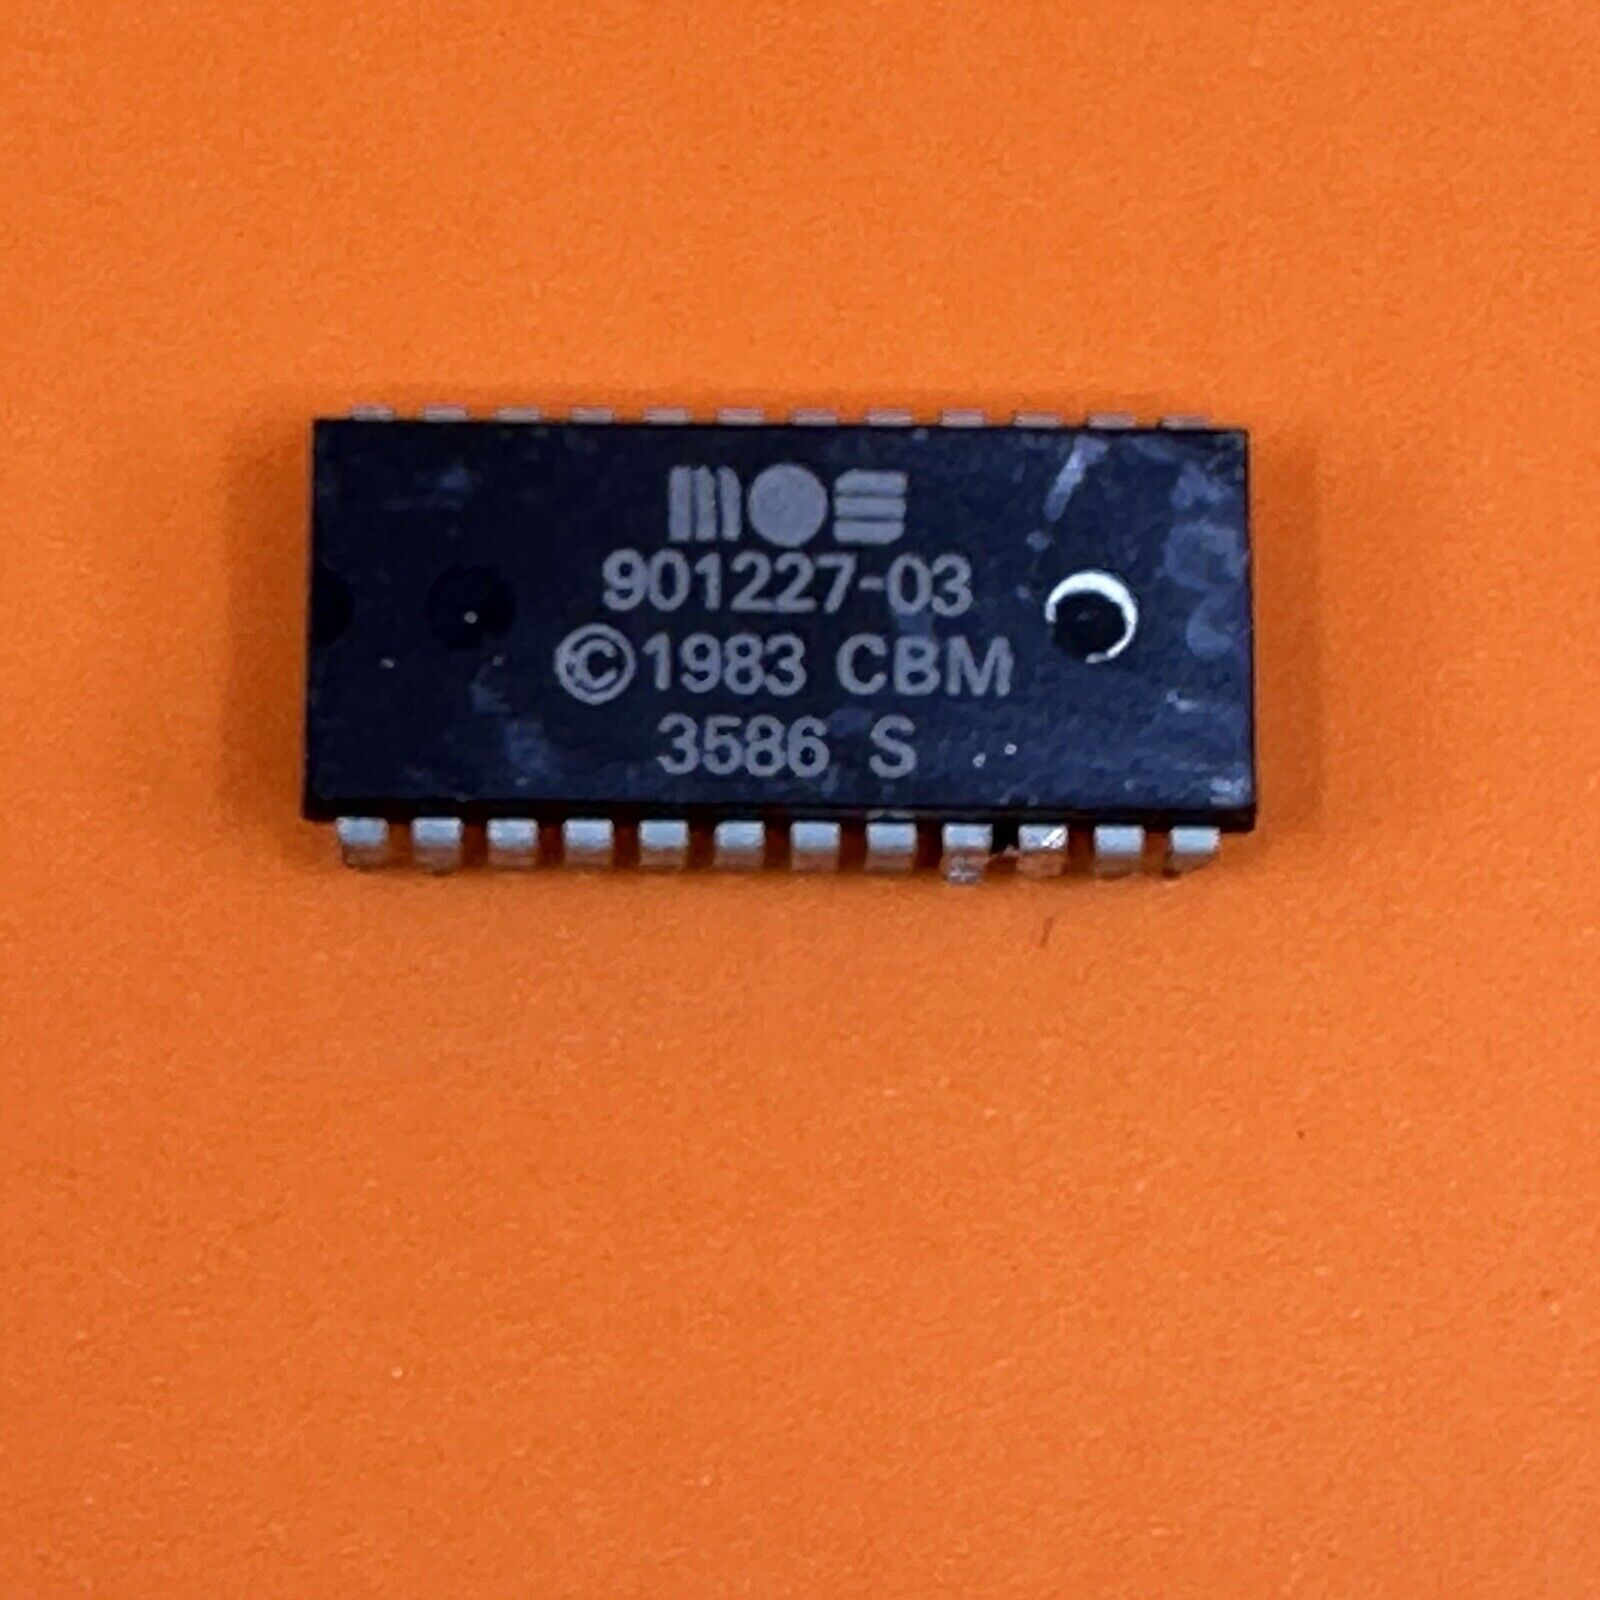 MOS 901227-03 Kernal ROM Chip for Commodore 64, Genuine Part Tested & Working.